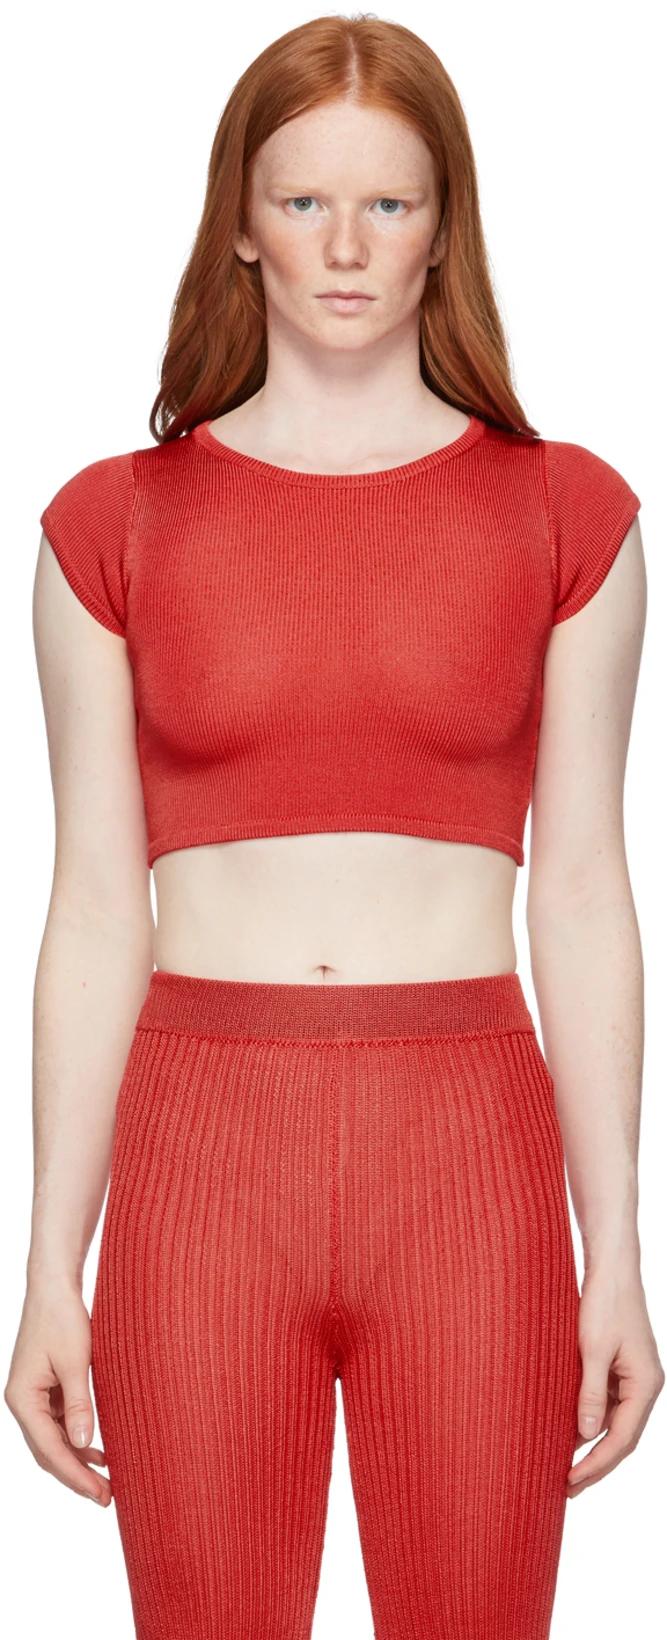 Red Knit Baby T-Shirt by CALLE DEL MAR